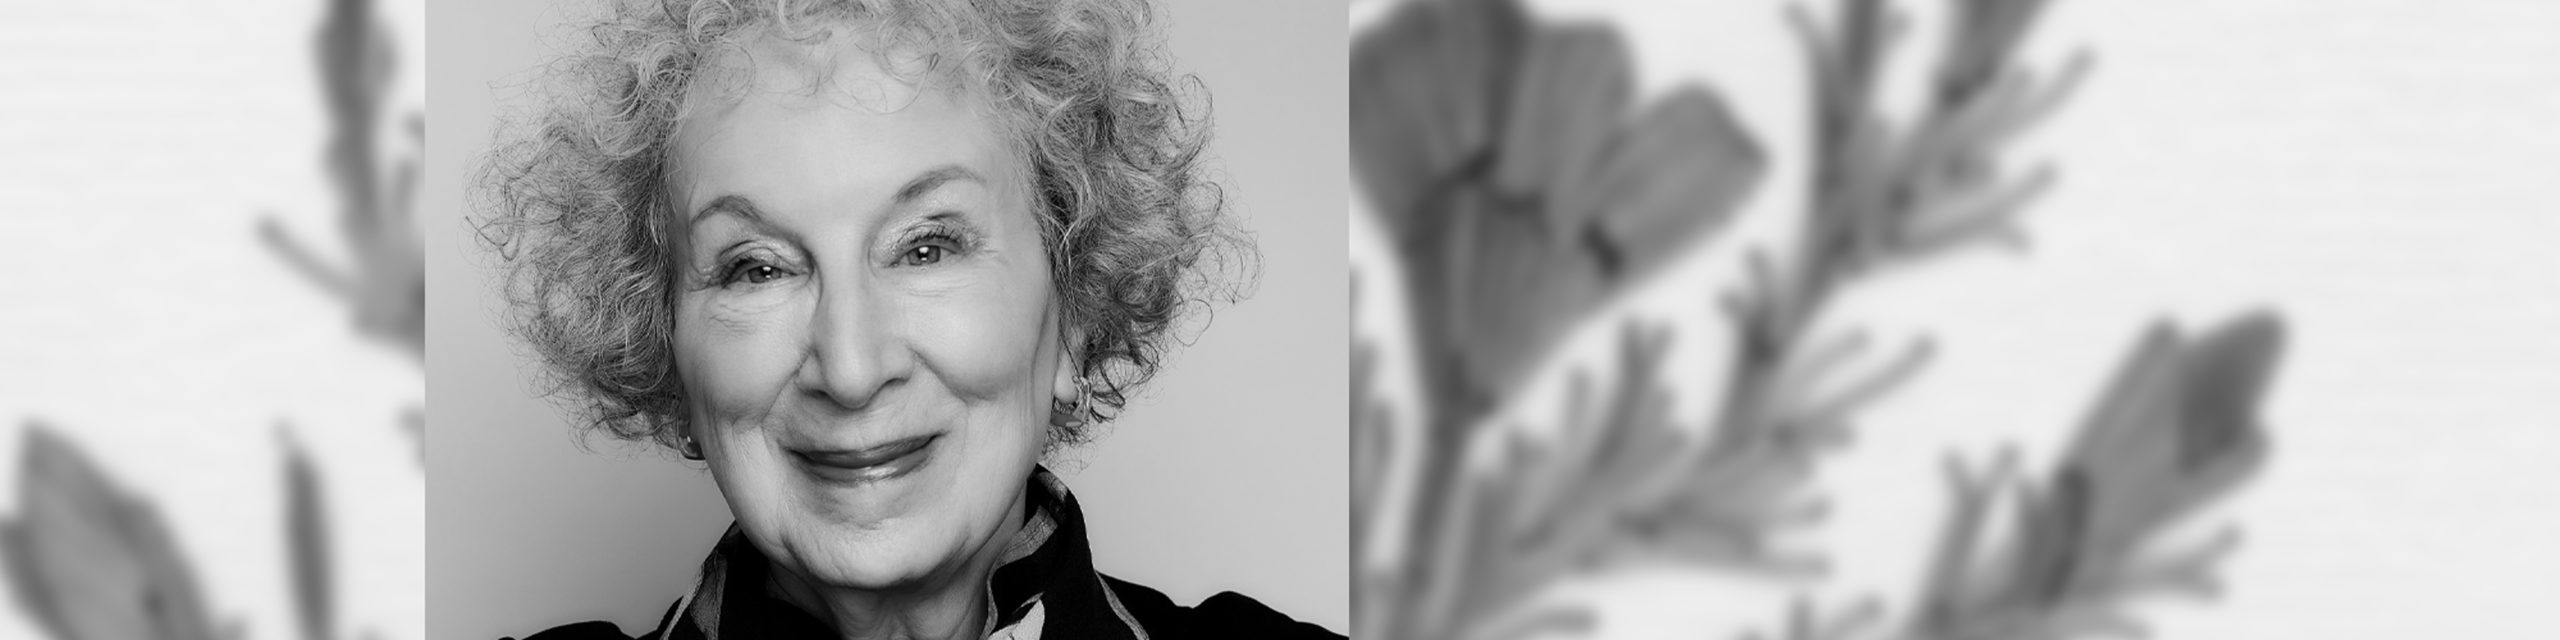 Black and White photo of Margaret Atwood smiling into camera